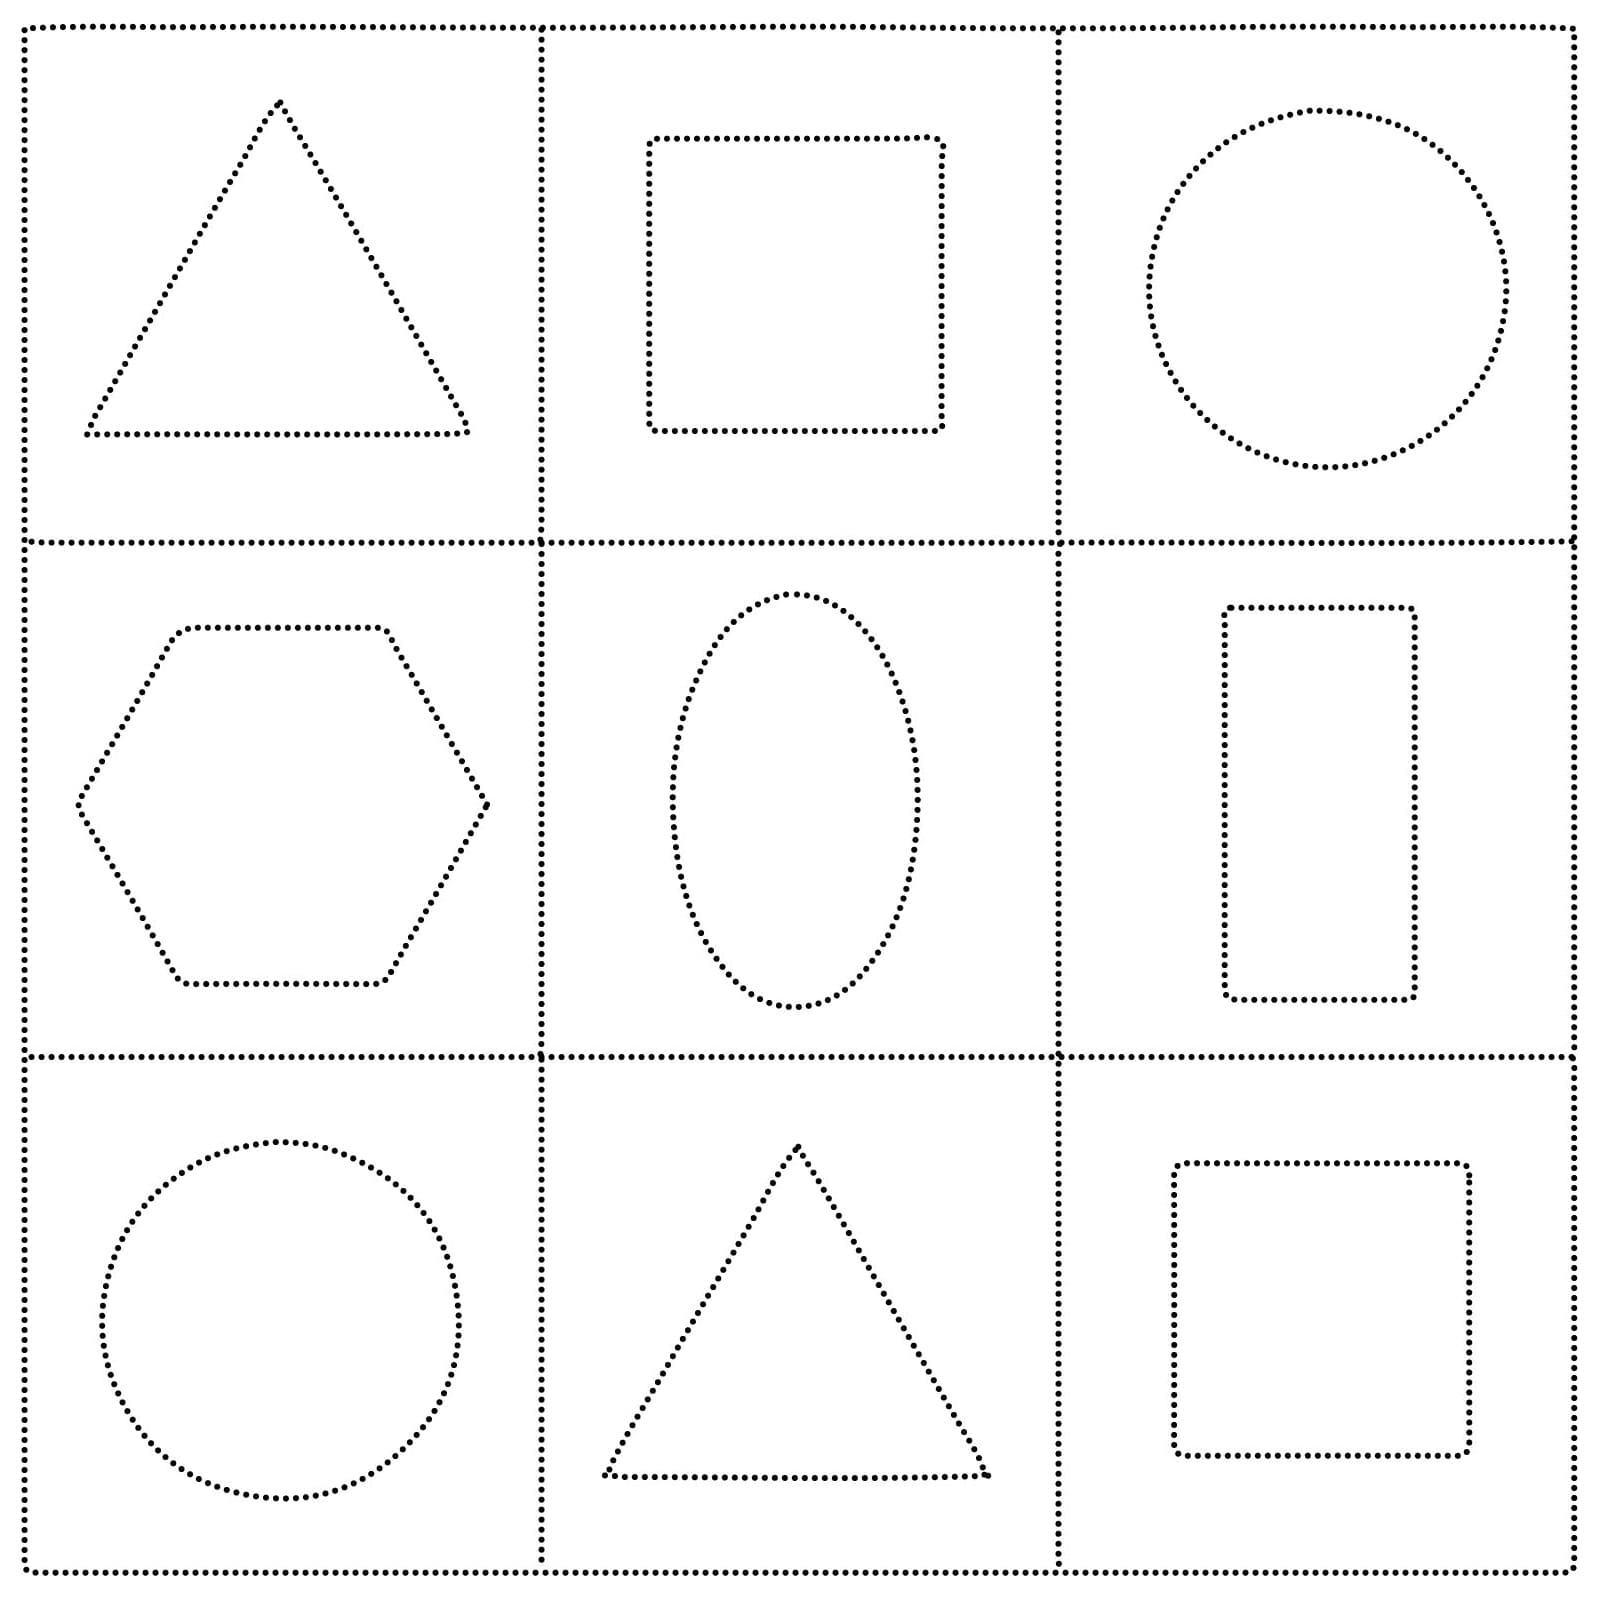 Shapes Tracing coloring page - Download, Print or Color Online for Free